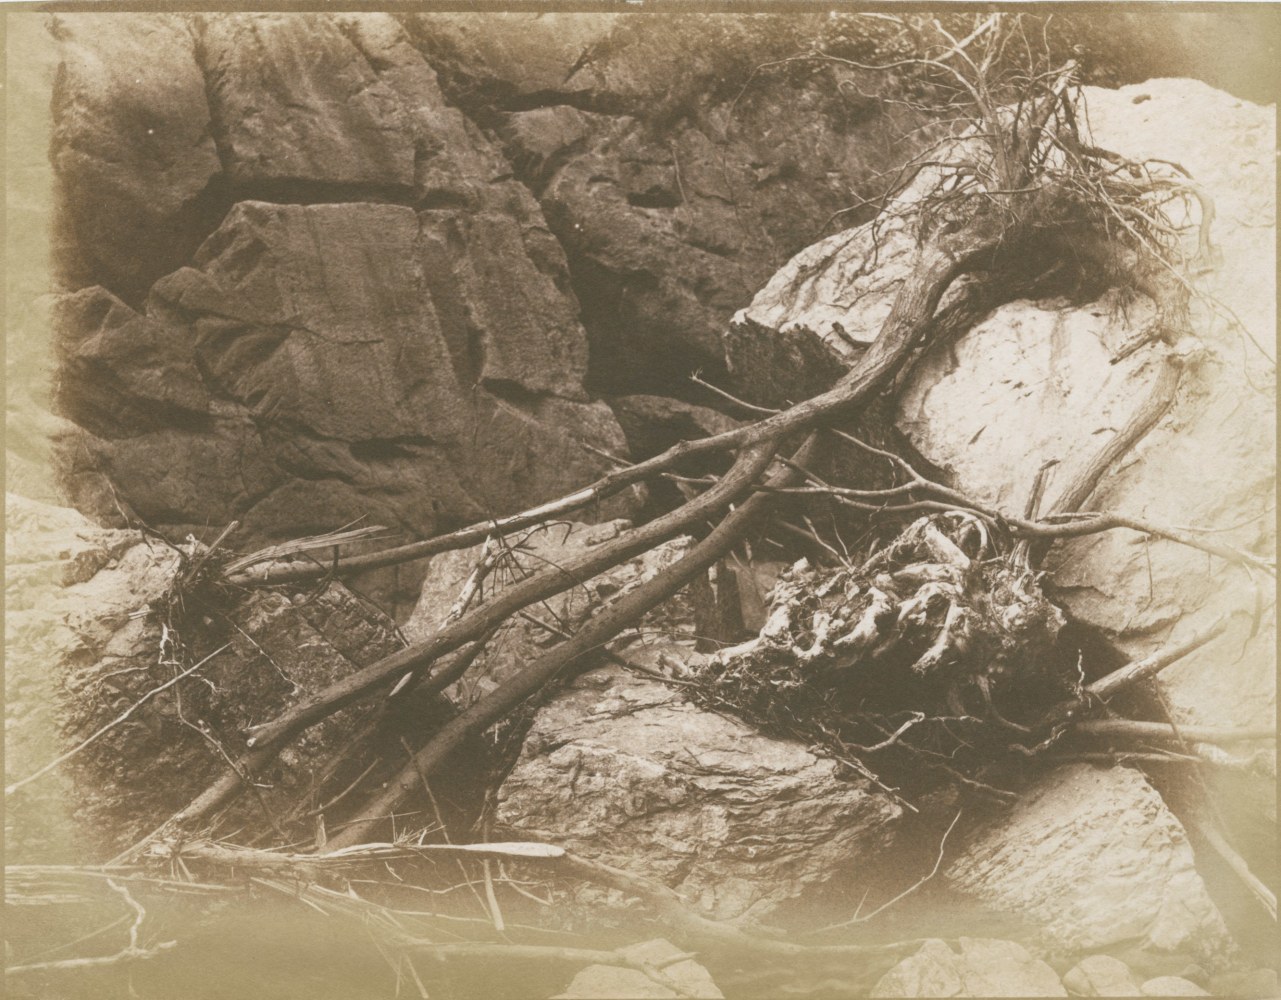 Hugh OWEN (English, 1808-1897) Branches and roots in dry riverbed, circa 1850 Salt print from a paper negative 17.3 x 22.4 cm image on 17.7 x 22.7 cm paper